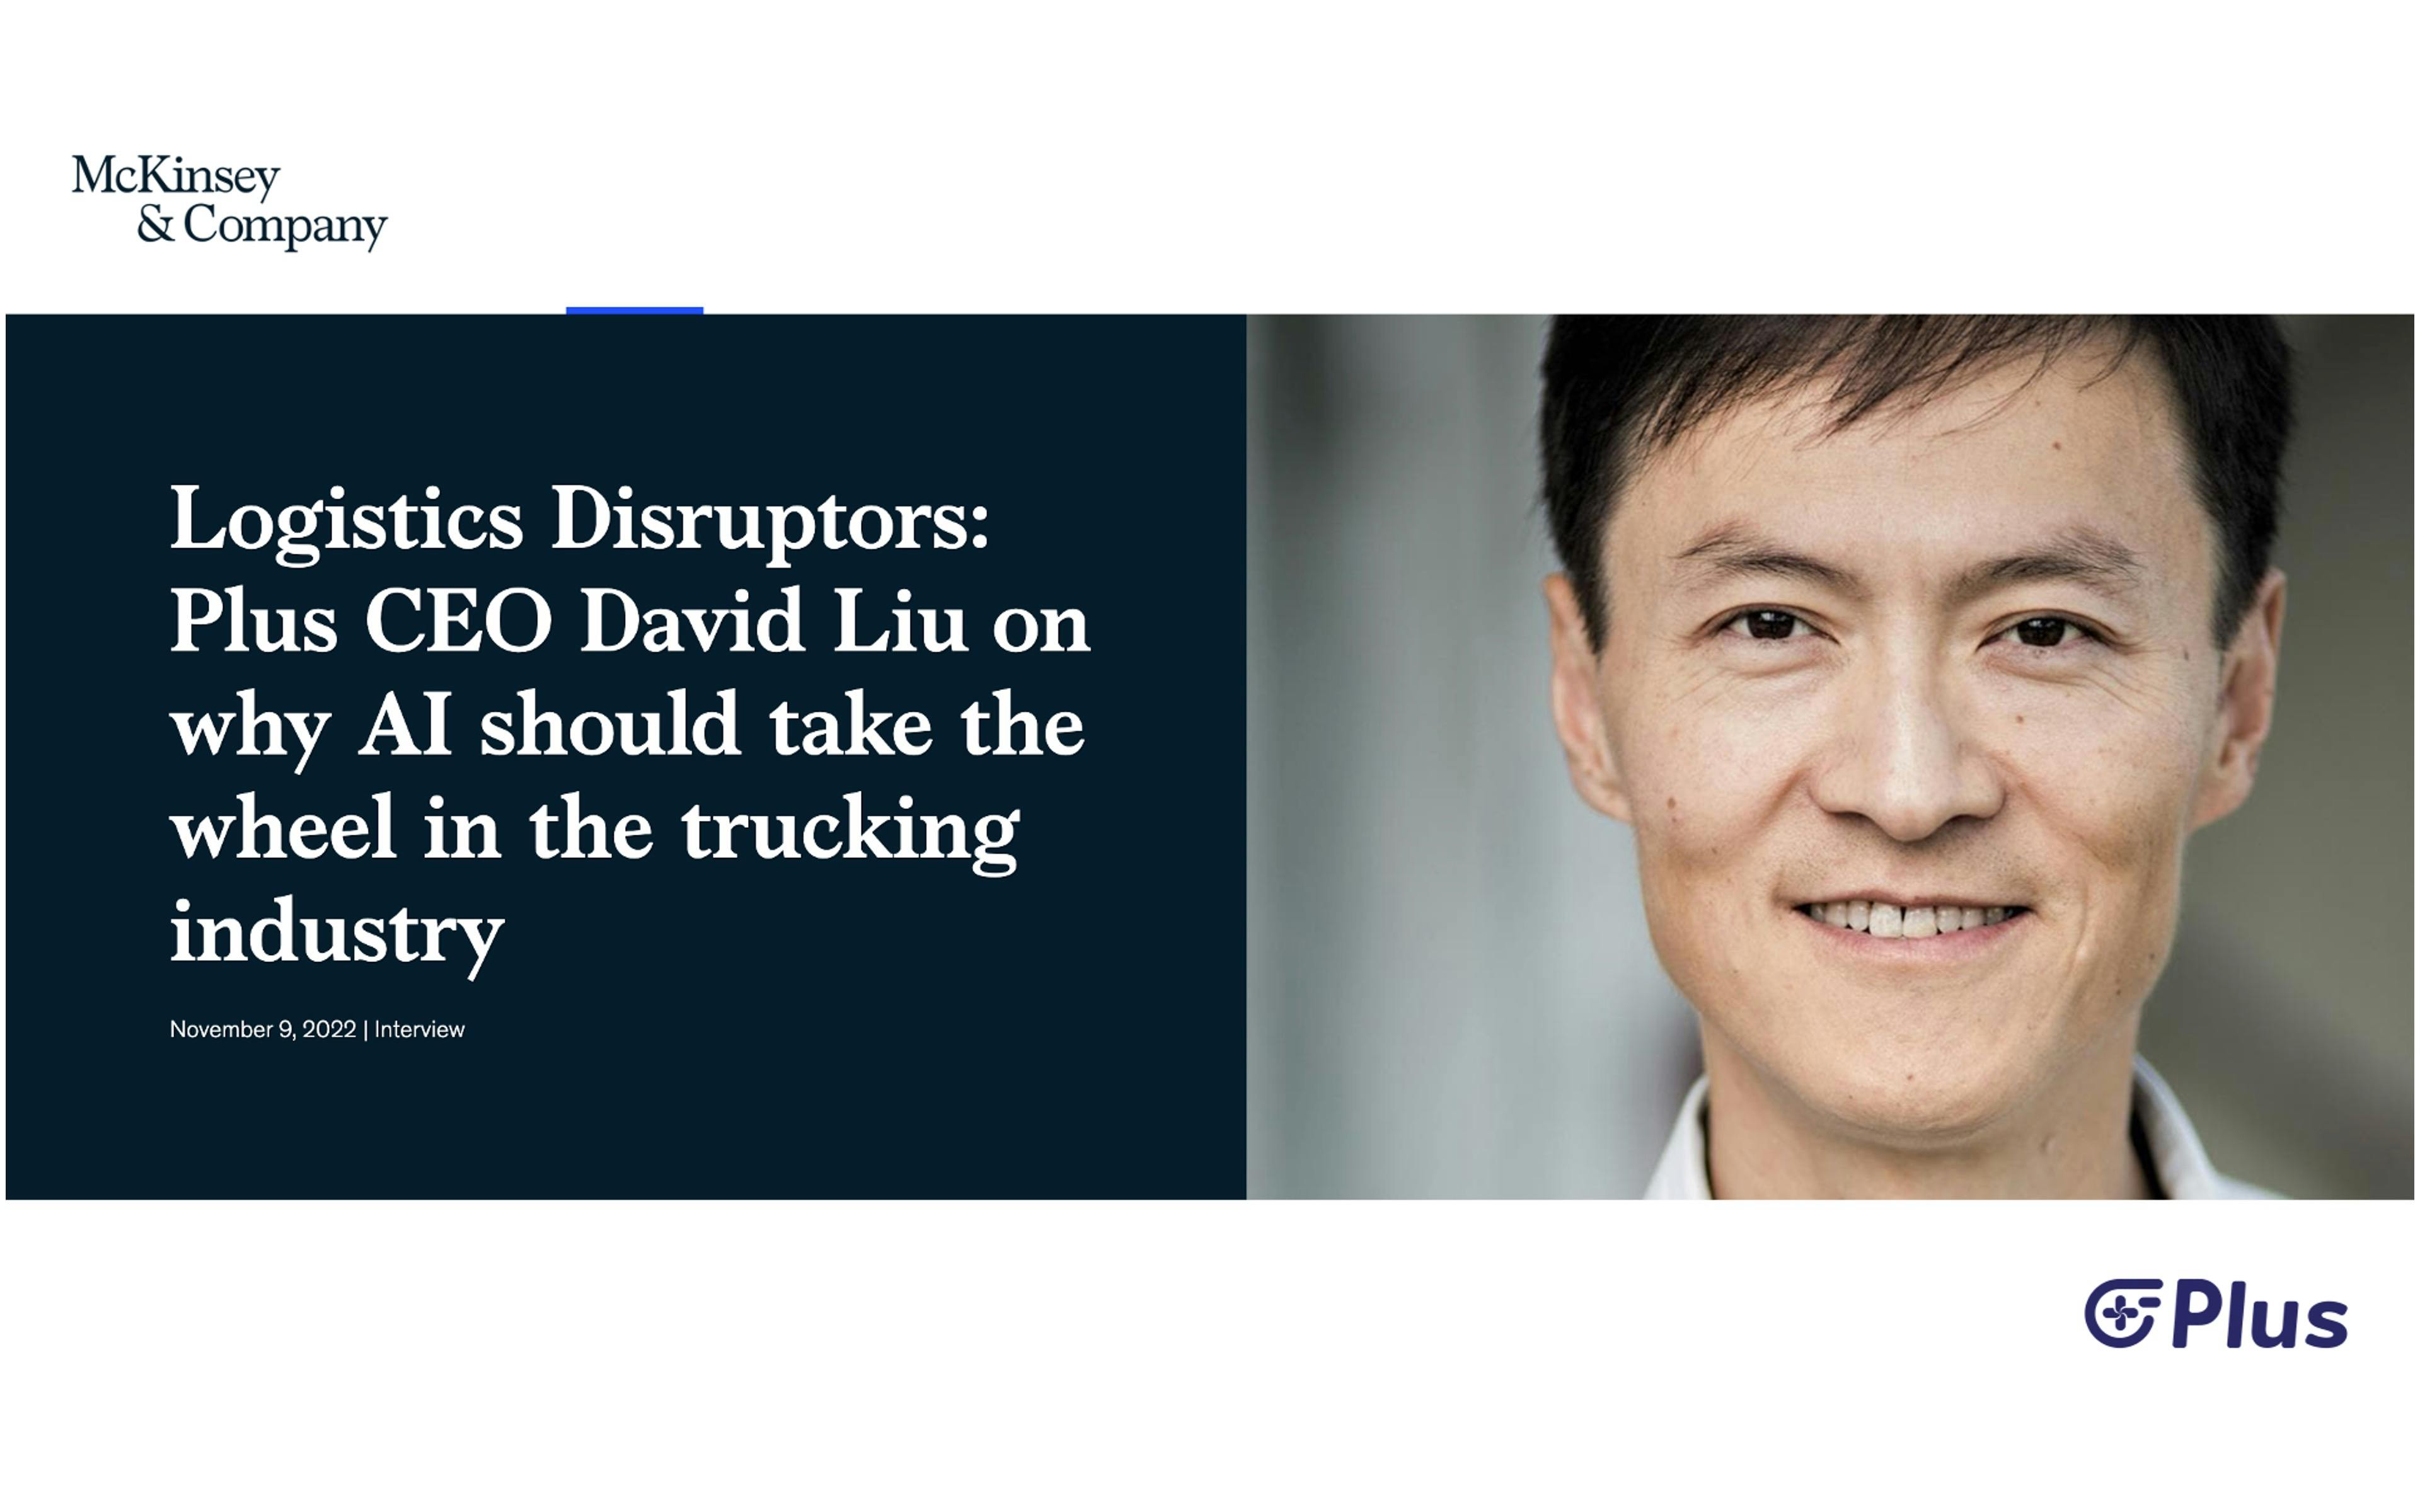 Logistics Disruptors: Plus CEO David Liu on why AI should take the wheel in the trucking industry